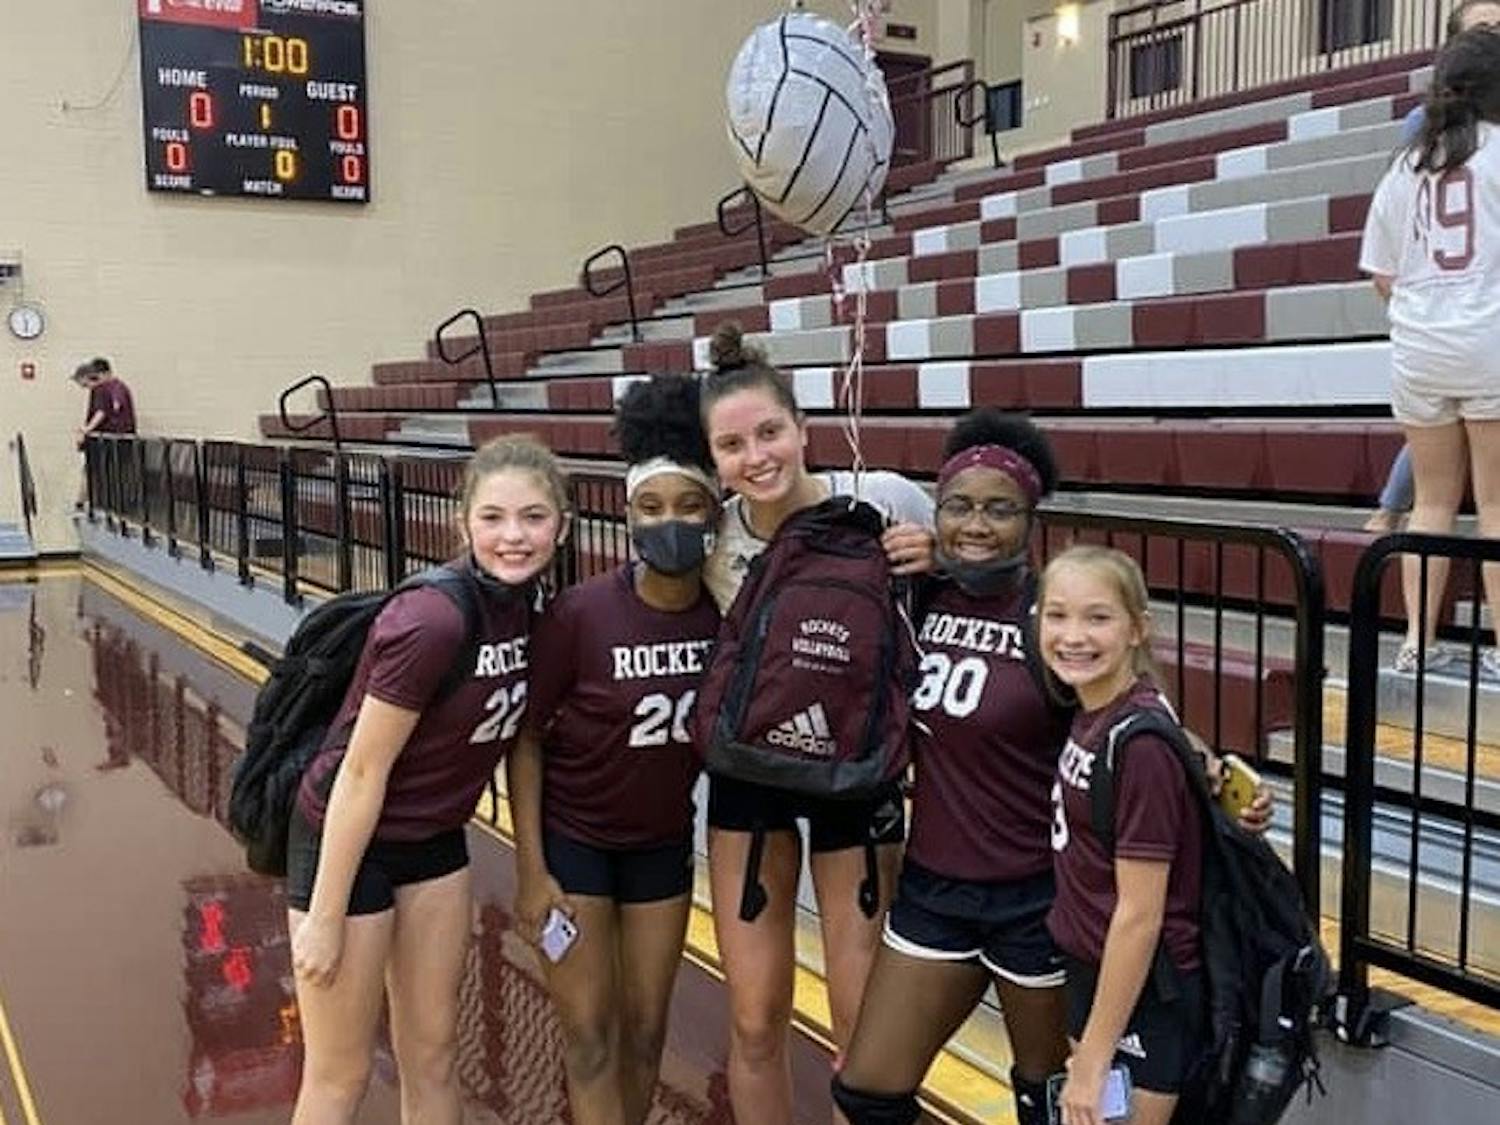 Florida's Merritt Beason (center), pictured while still in high school, poses with some of the middle school players she coached.